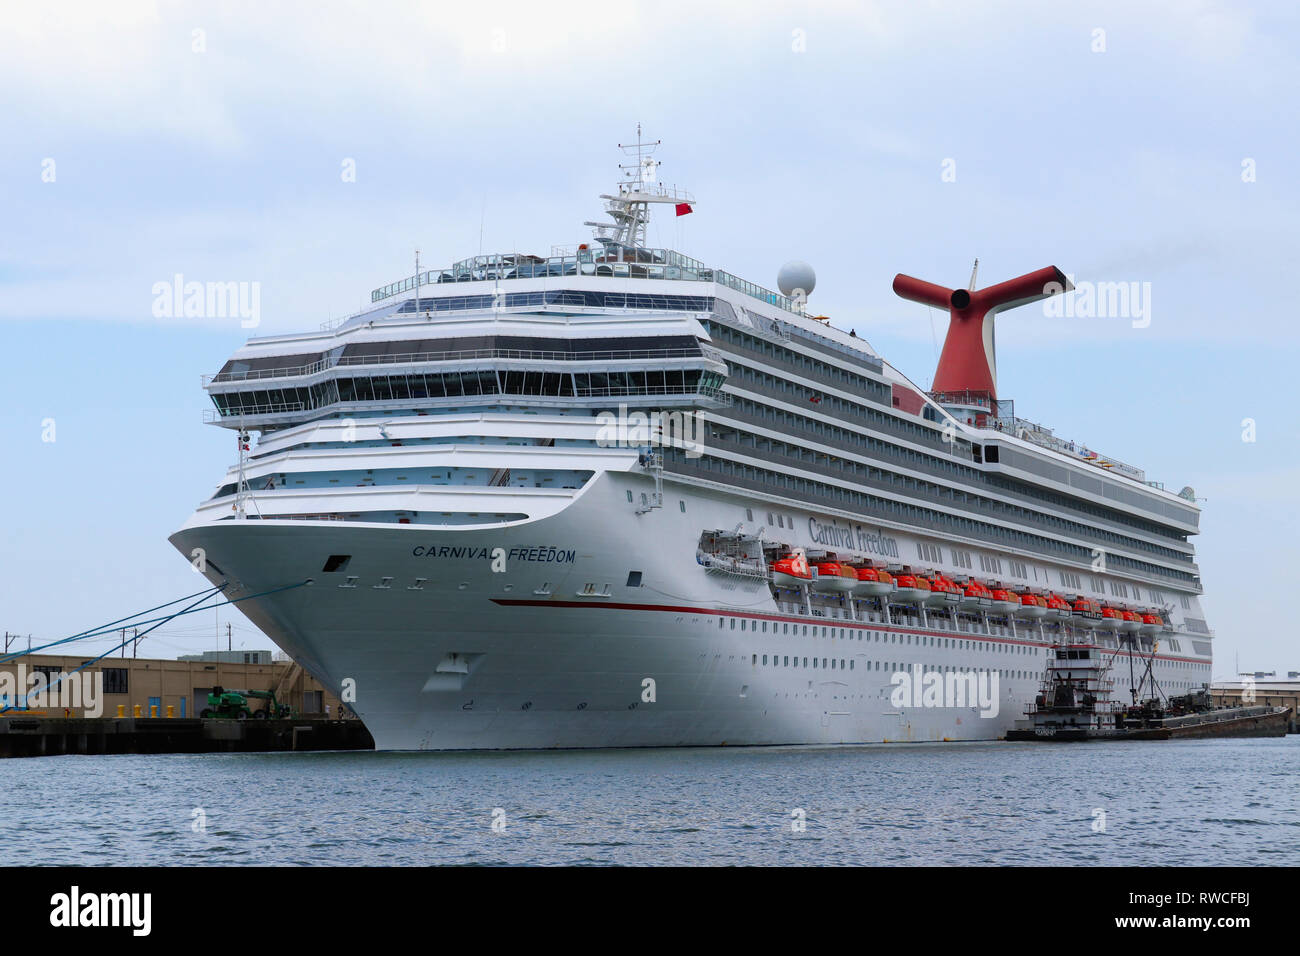 GALVESTON, TEXAS, USA - JUNE 9, 2018: Carnival Freedom cruise liner, docked in Port of Galveston, Texas. Operated by Carnival Cruise Line. Stock Photo